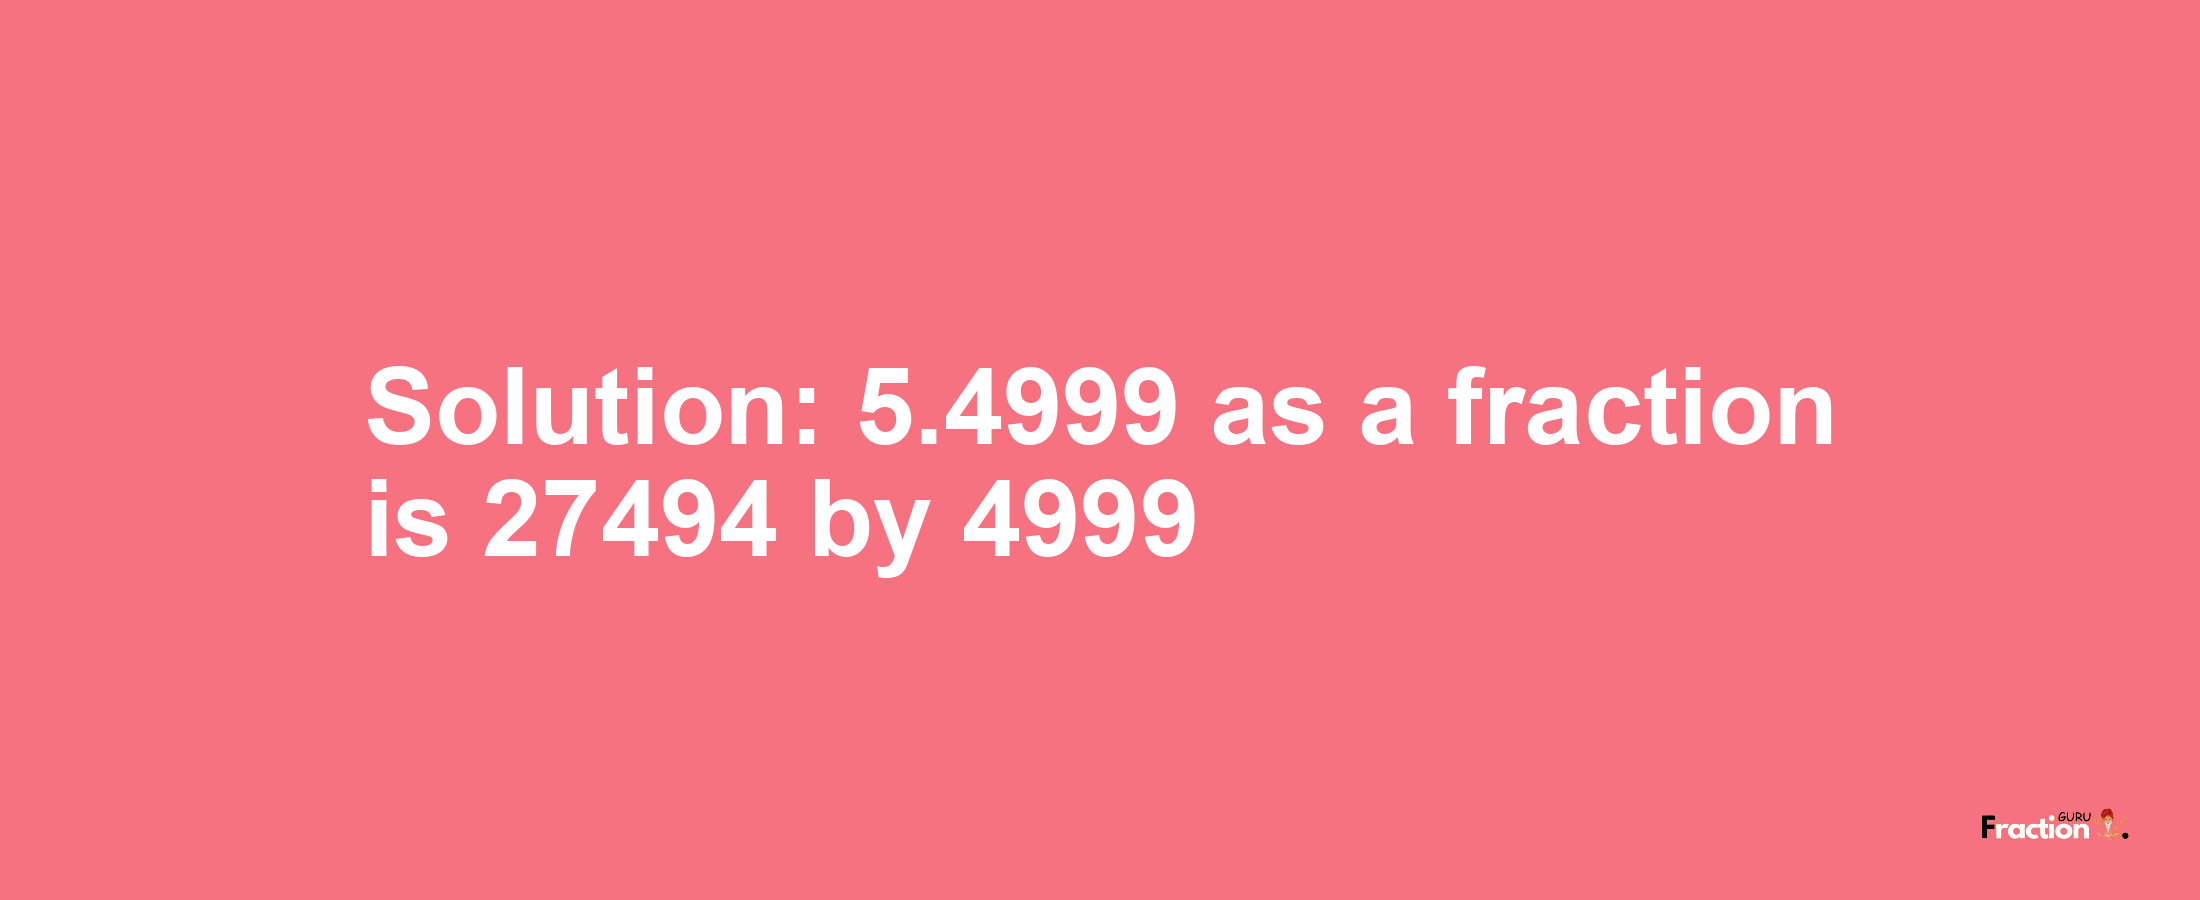 Solution:5.4999 as a fraction is 27494/4999